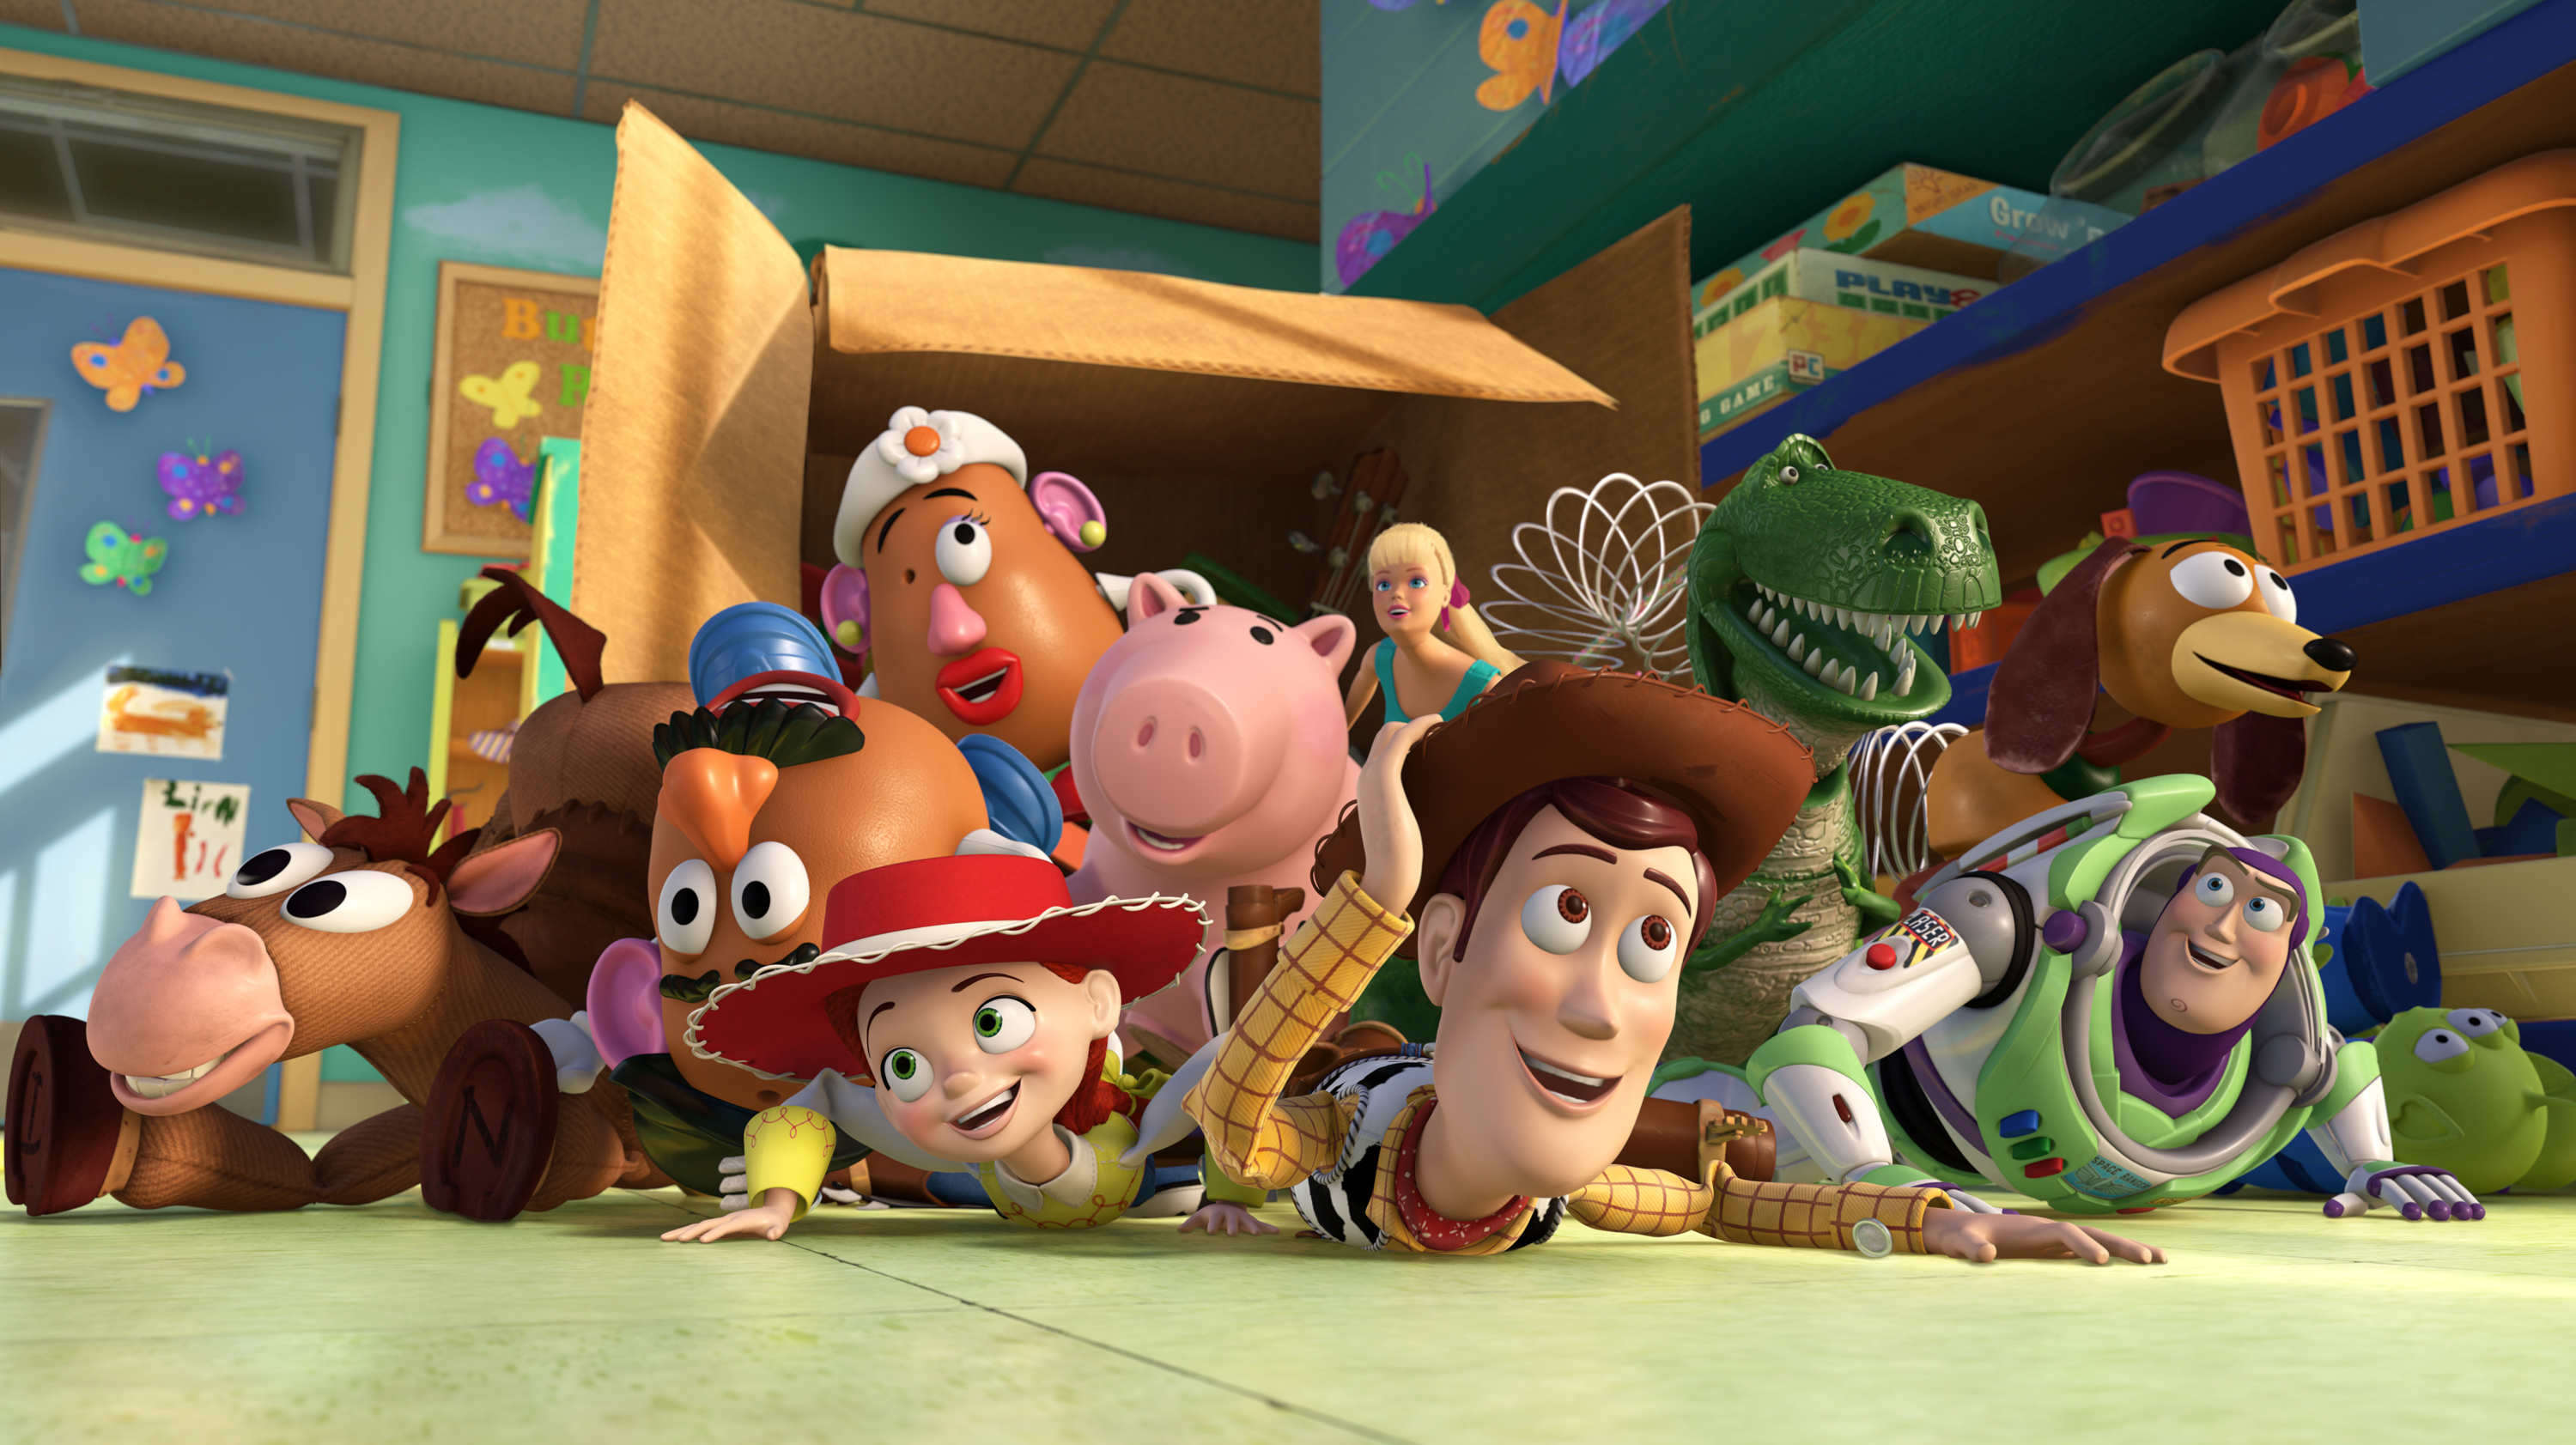 Toy Story 3 Desktops   Movie Wallpapers